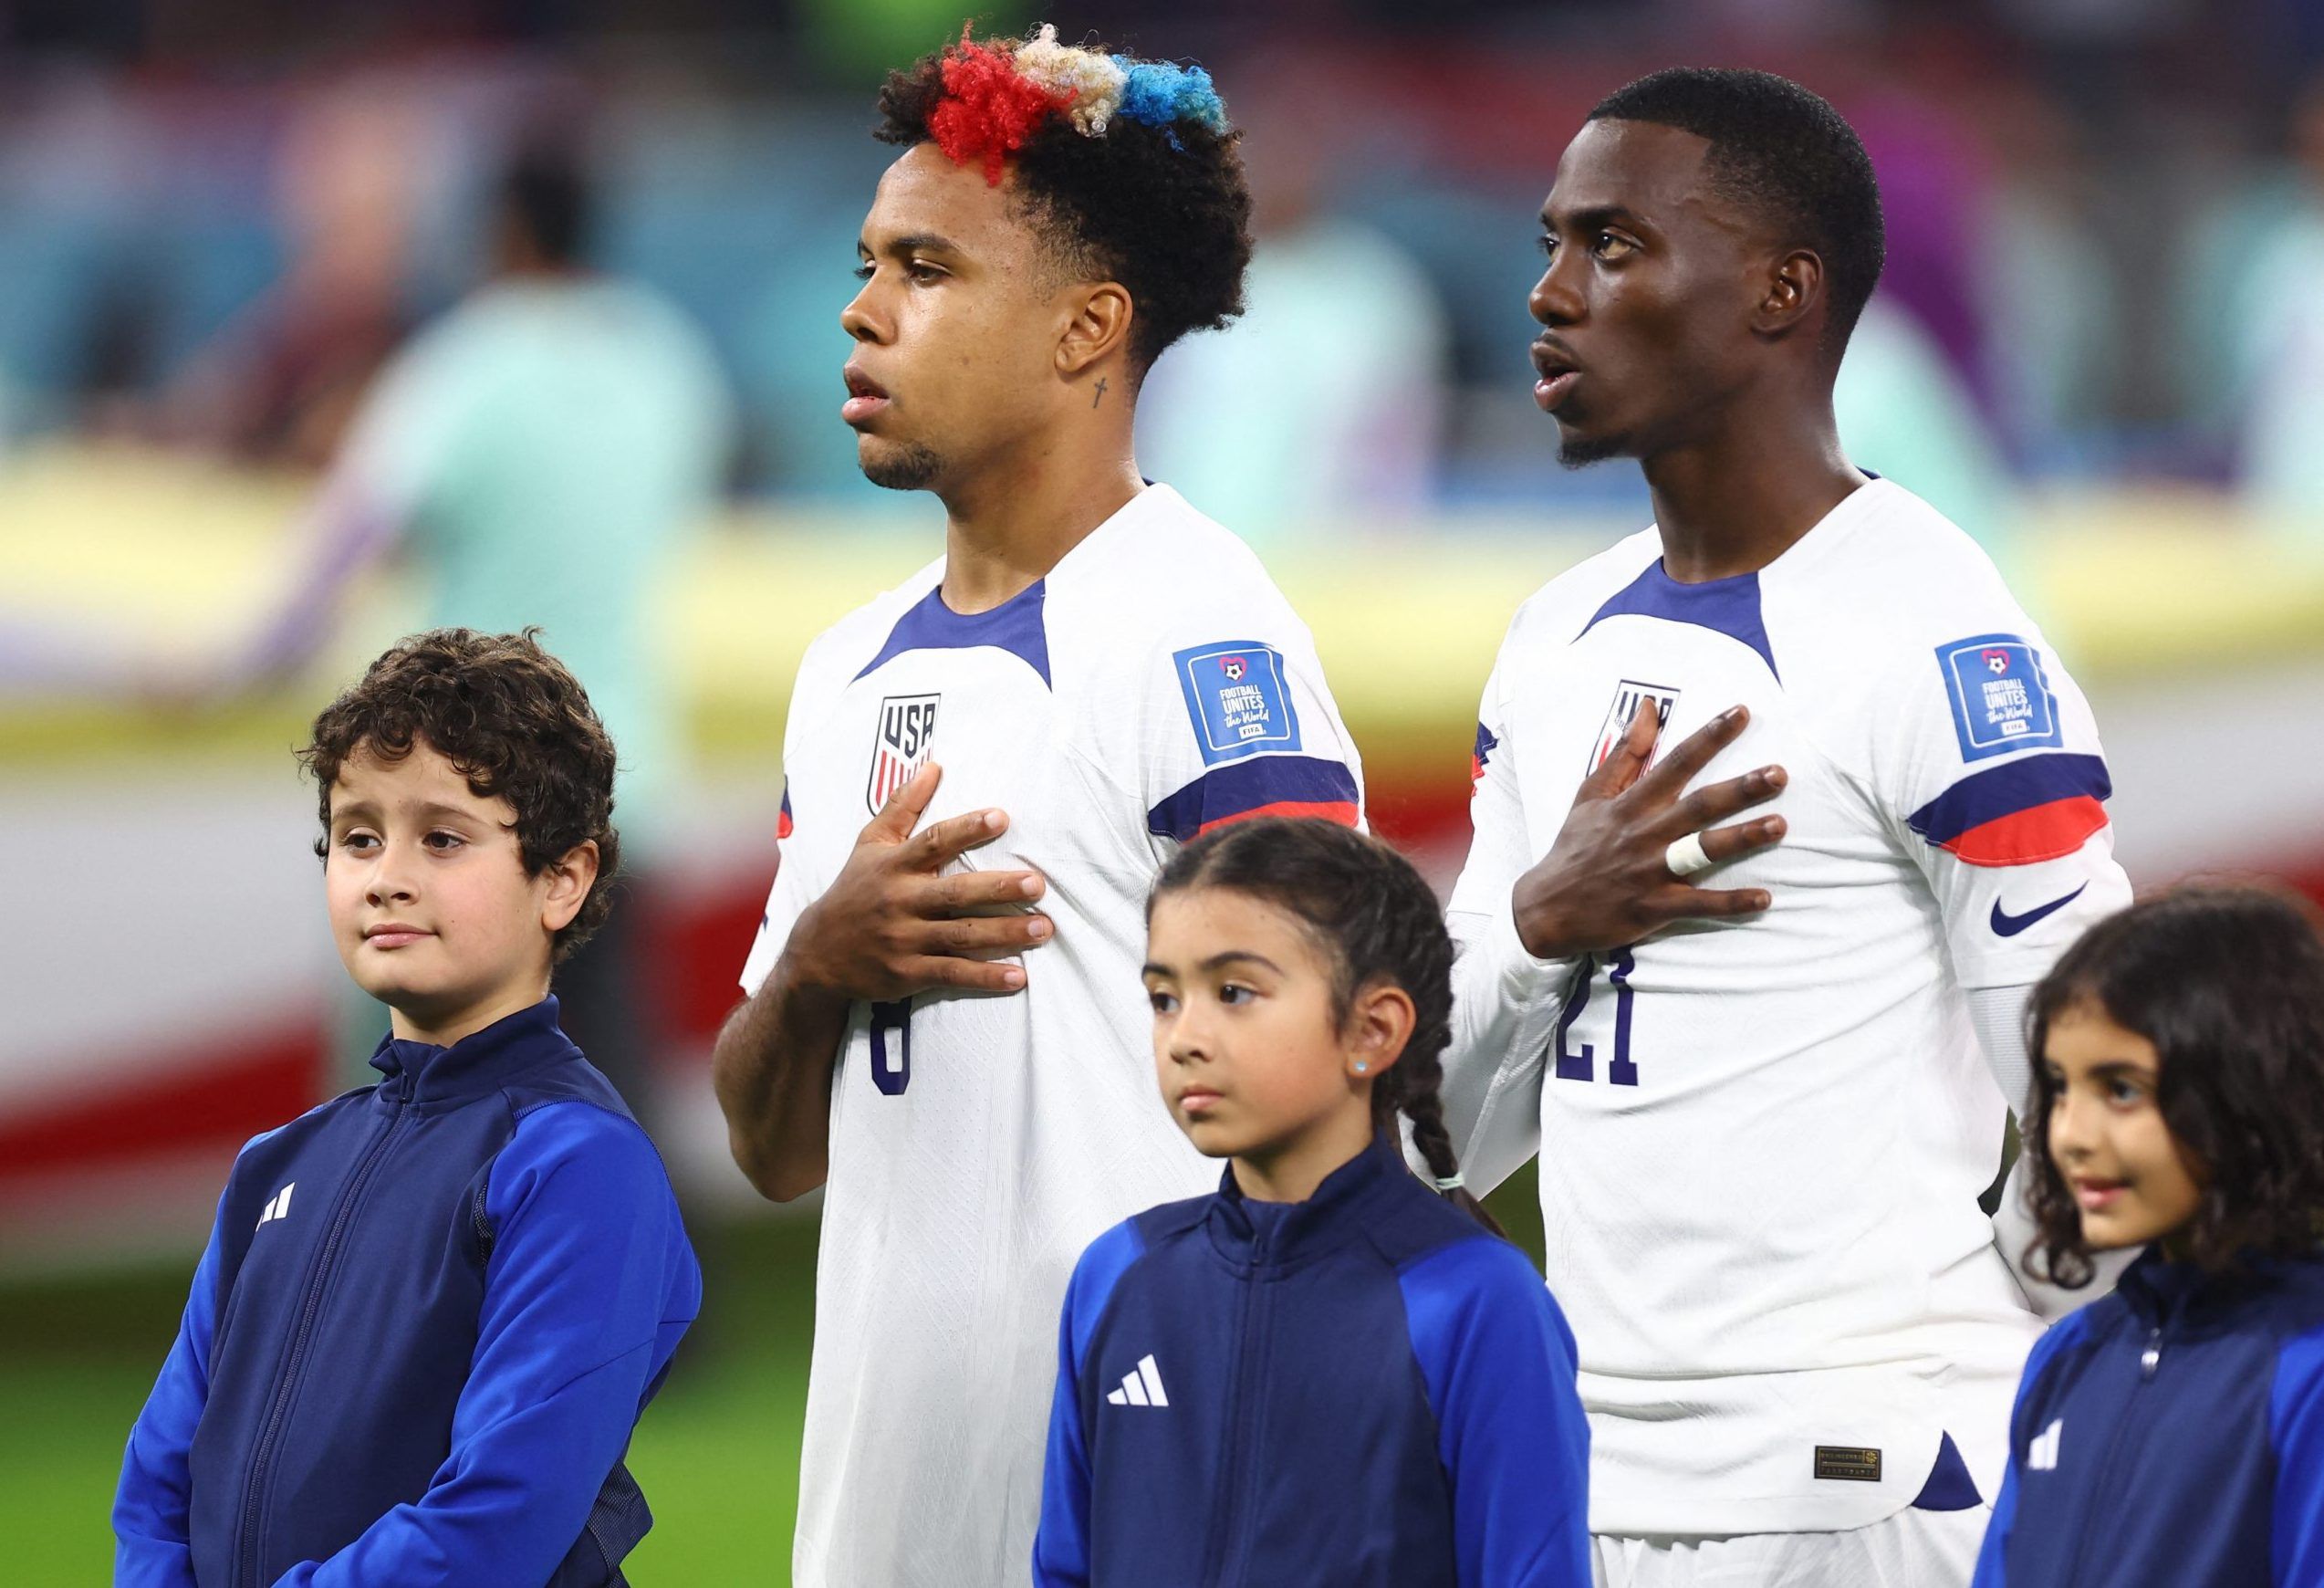 Weston McKennie and Timothy Weah of the U.S. line up before the match